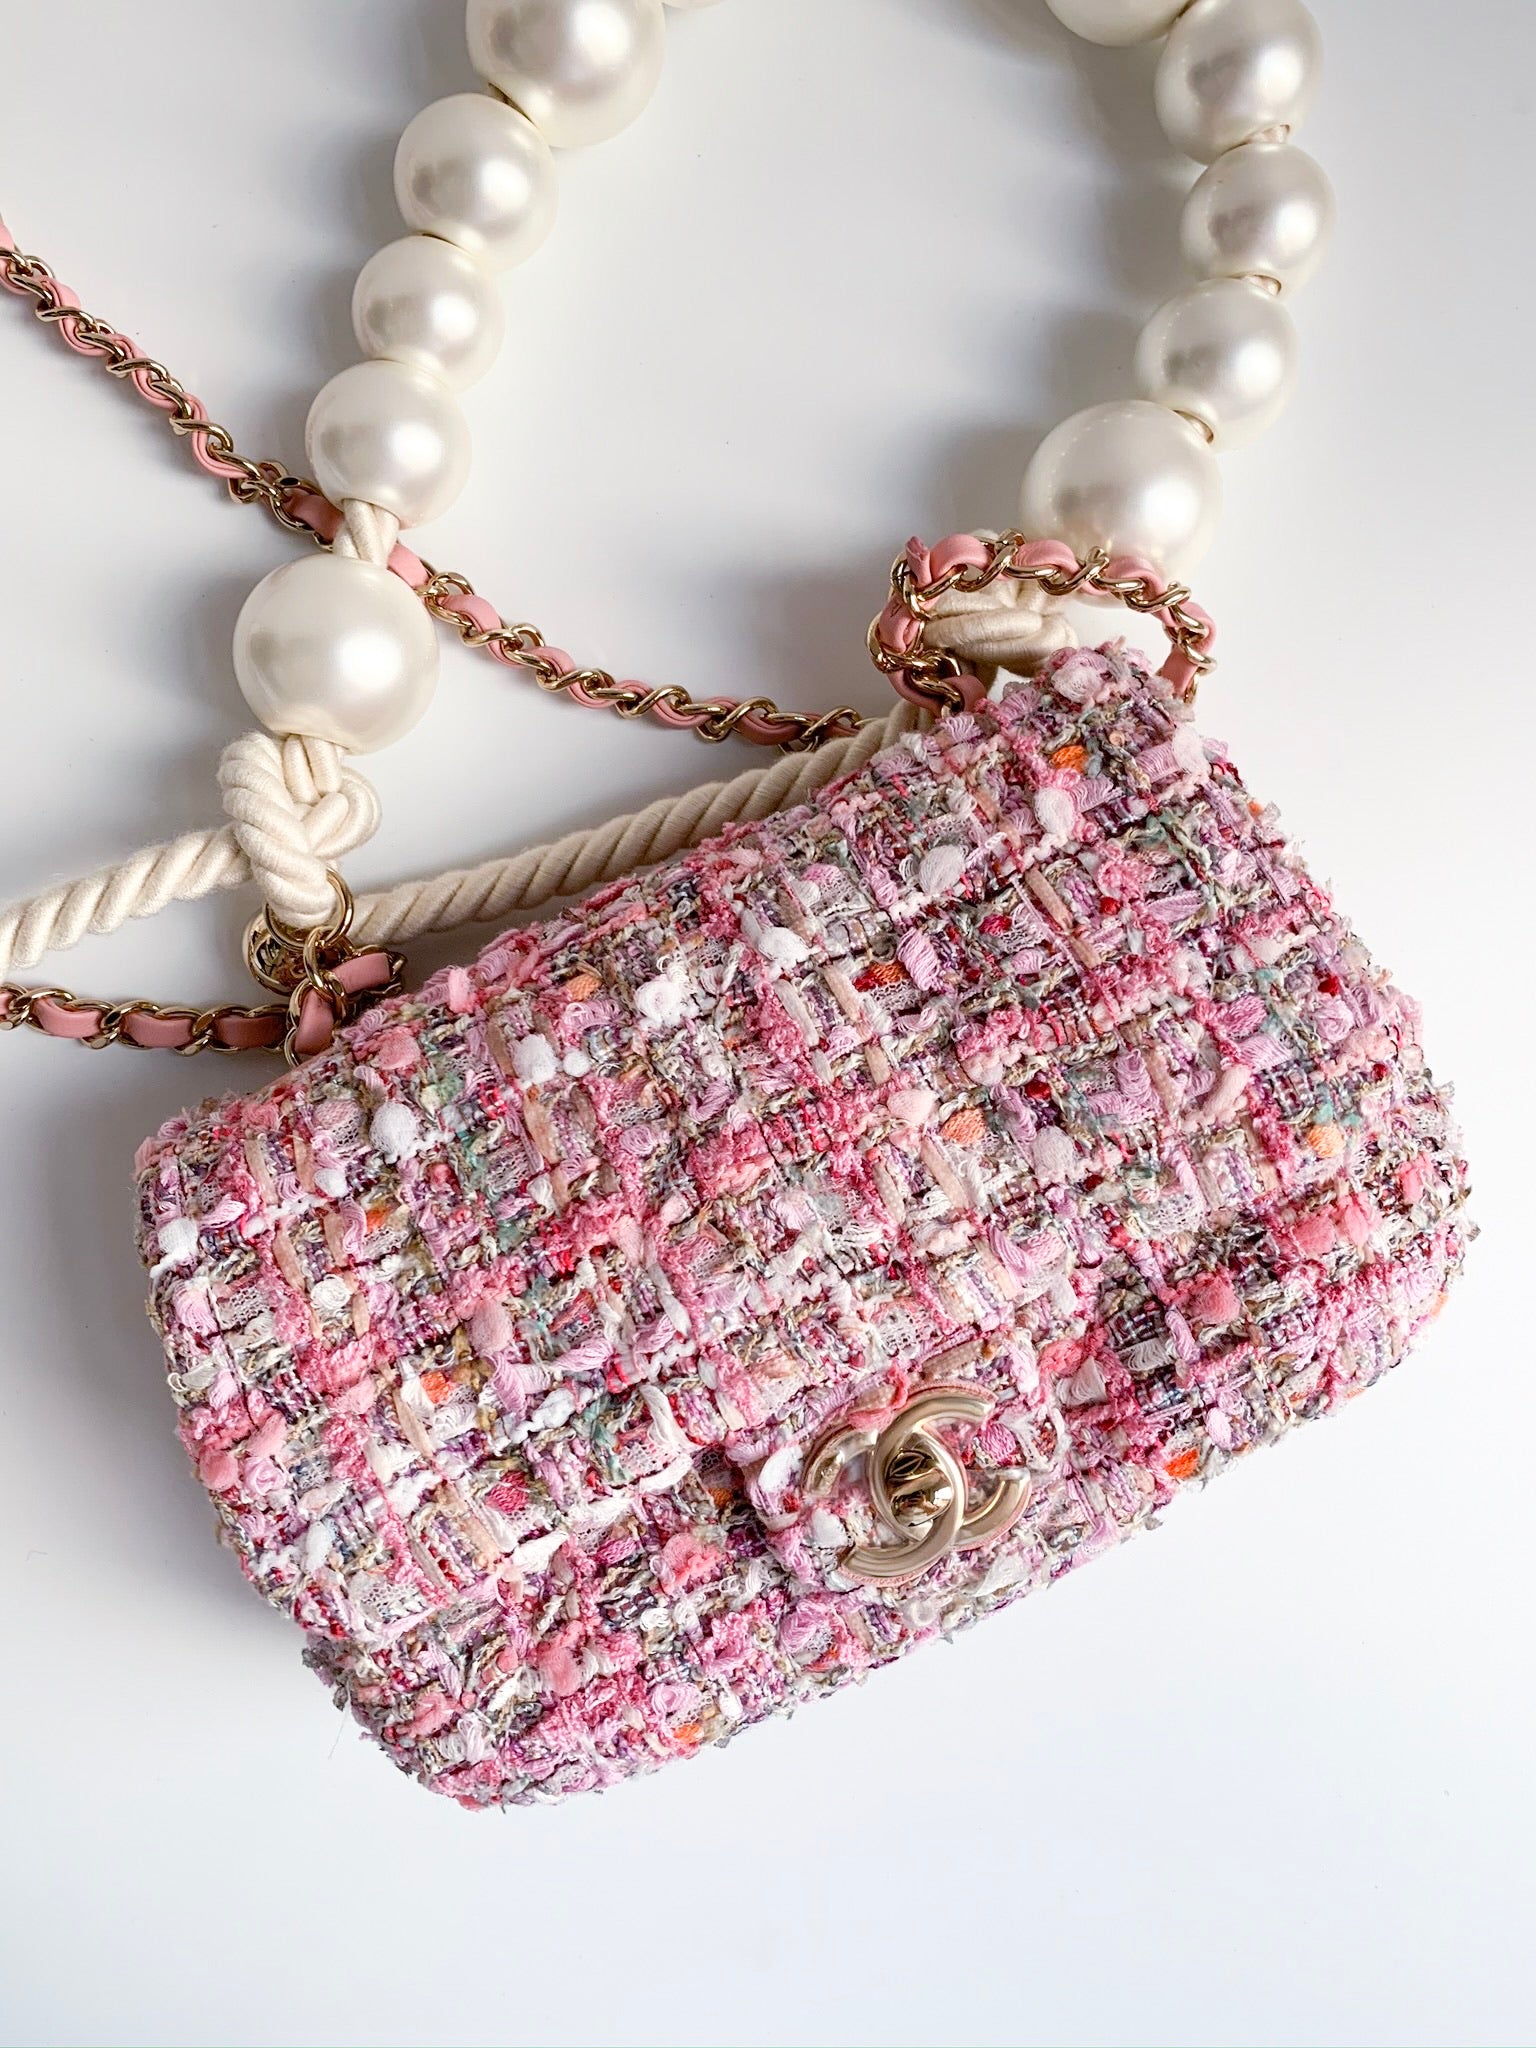 2019 Chanel Pink Tweed Fabric and Pearls Classic Single Flap Bag at 1stDibs